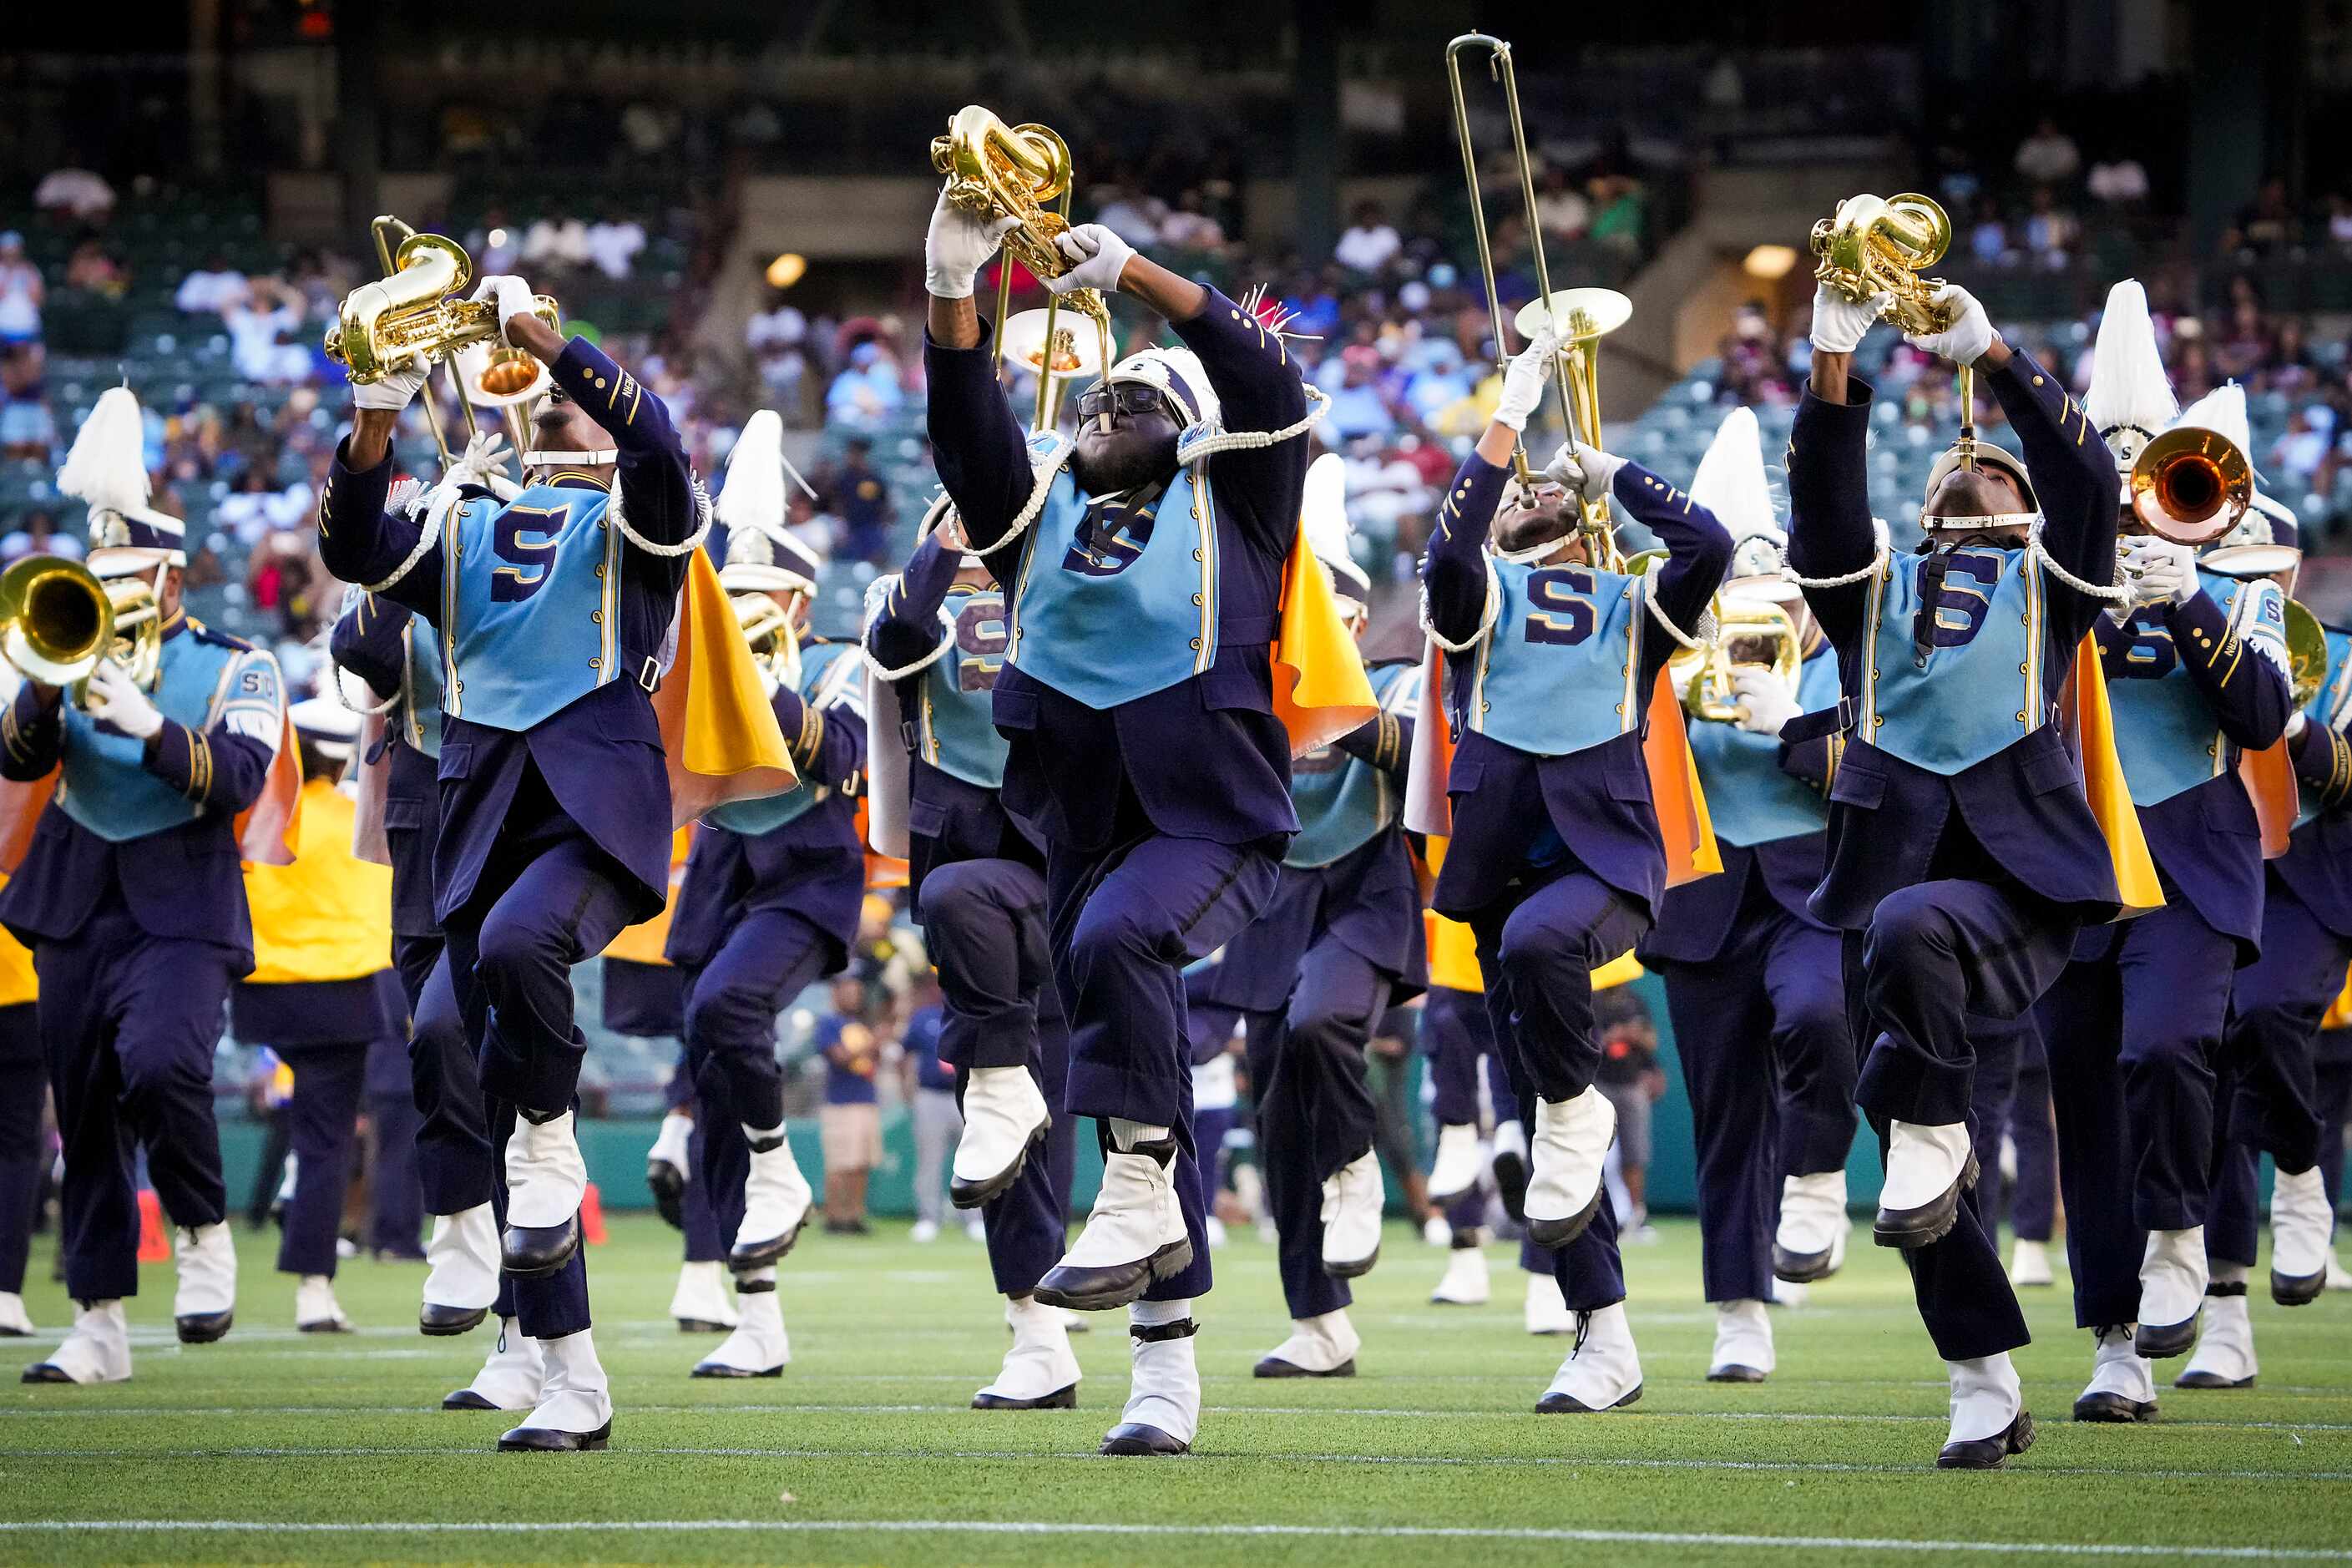 Members of the Southern Human Jukebox marching band perform during halftime of an NCAA...